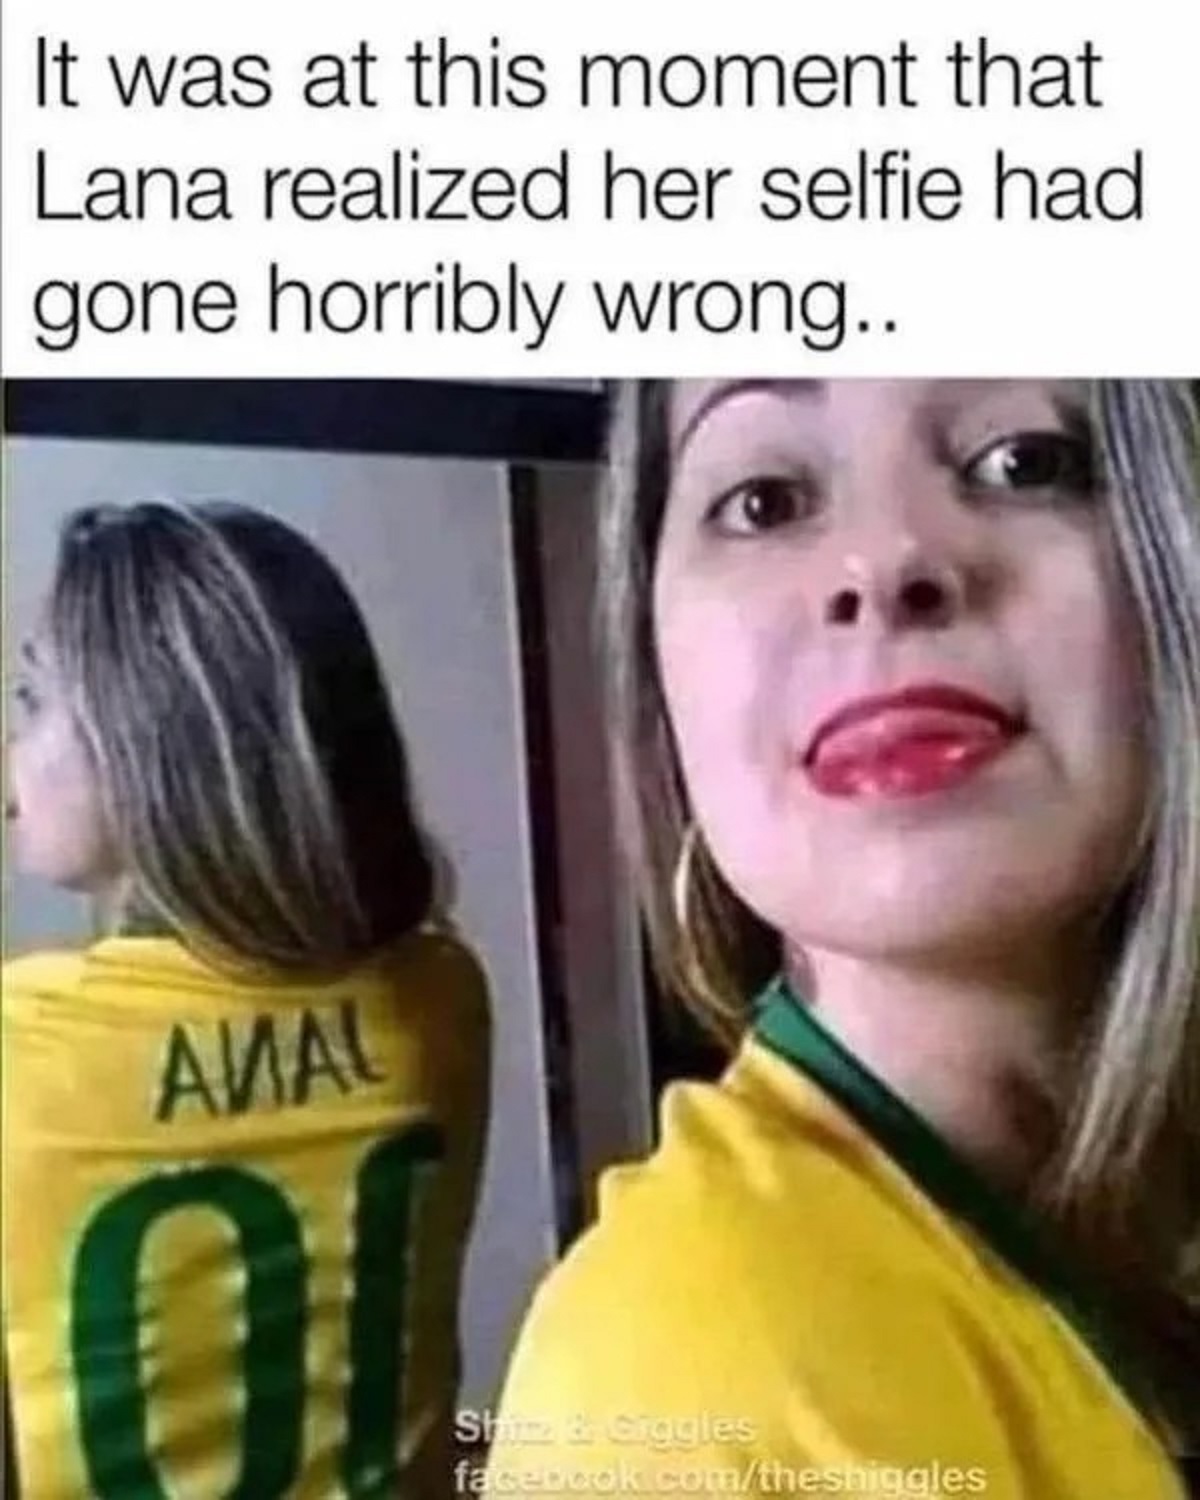 meme about selfies - It was at this moment that Lana realized her selfie had gone horribly wrong.. Amal Shitz & Giggles facebook.comtheshiggles